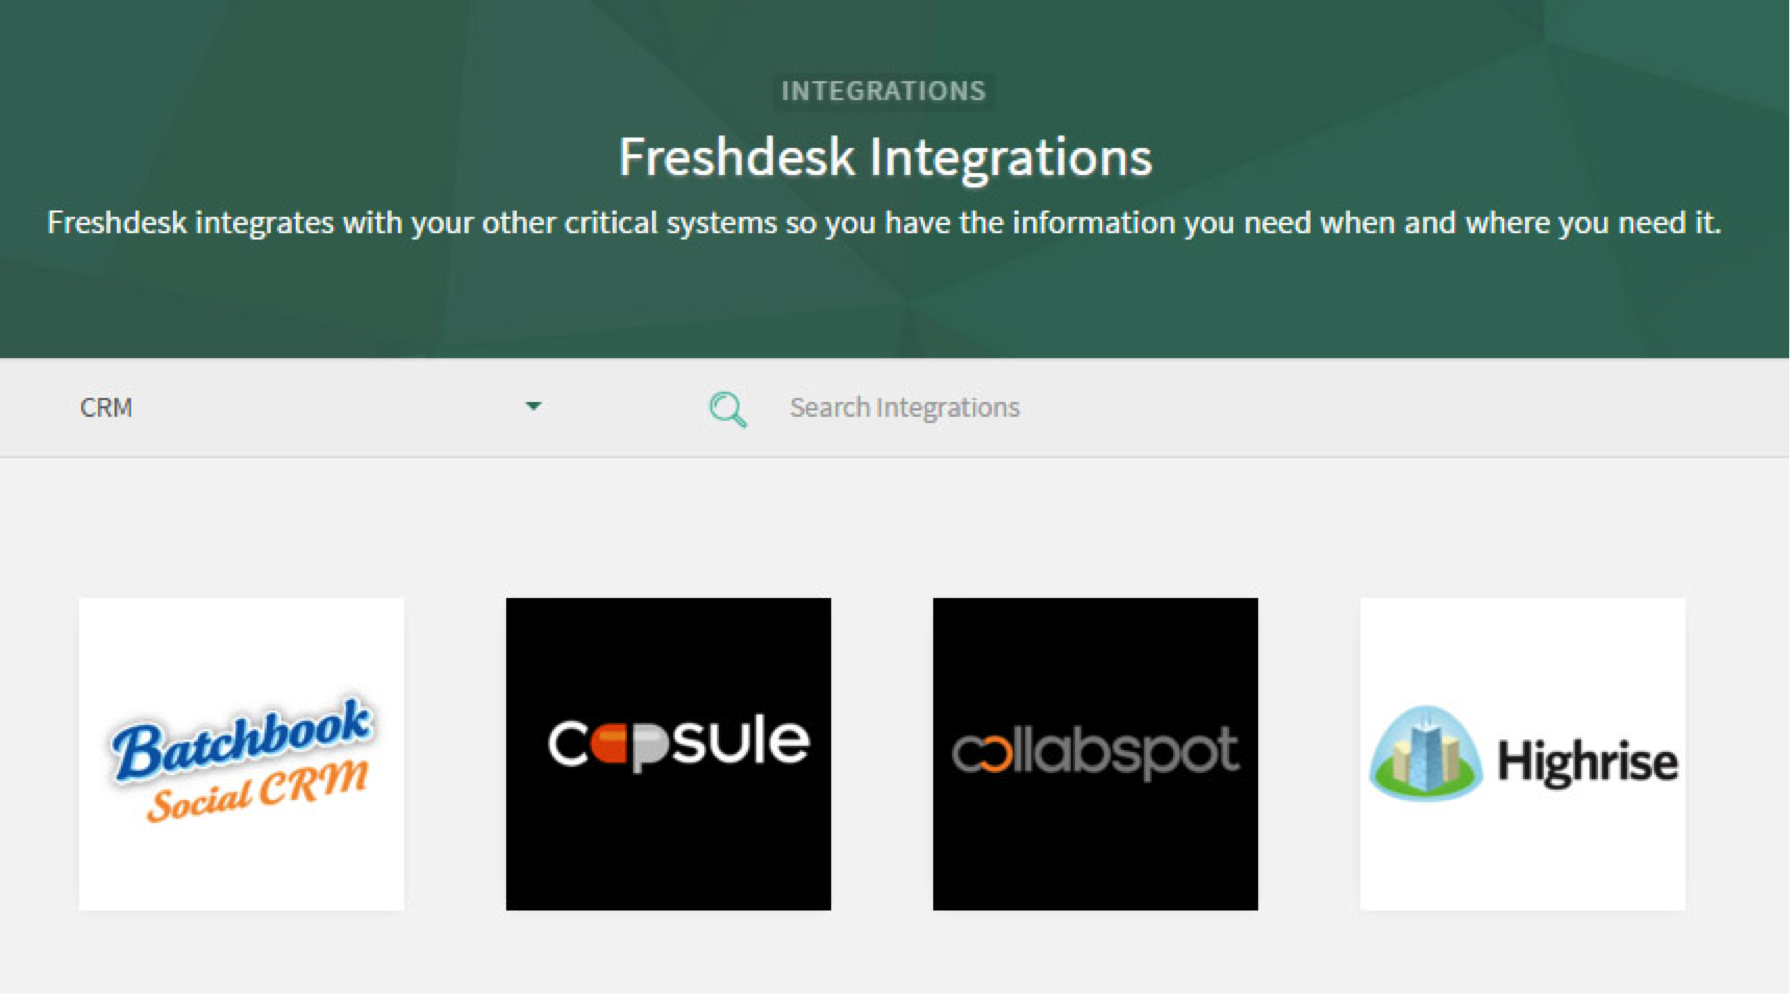 Like Freshdesk, you can work out an alliance partenership with top CRM apps that it integrates with.